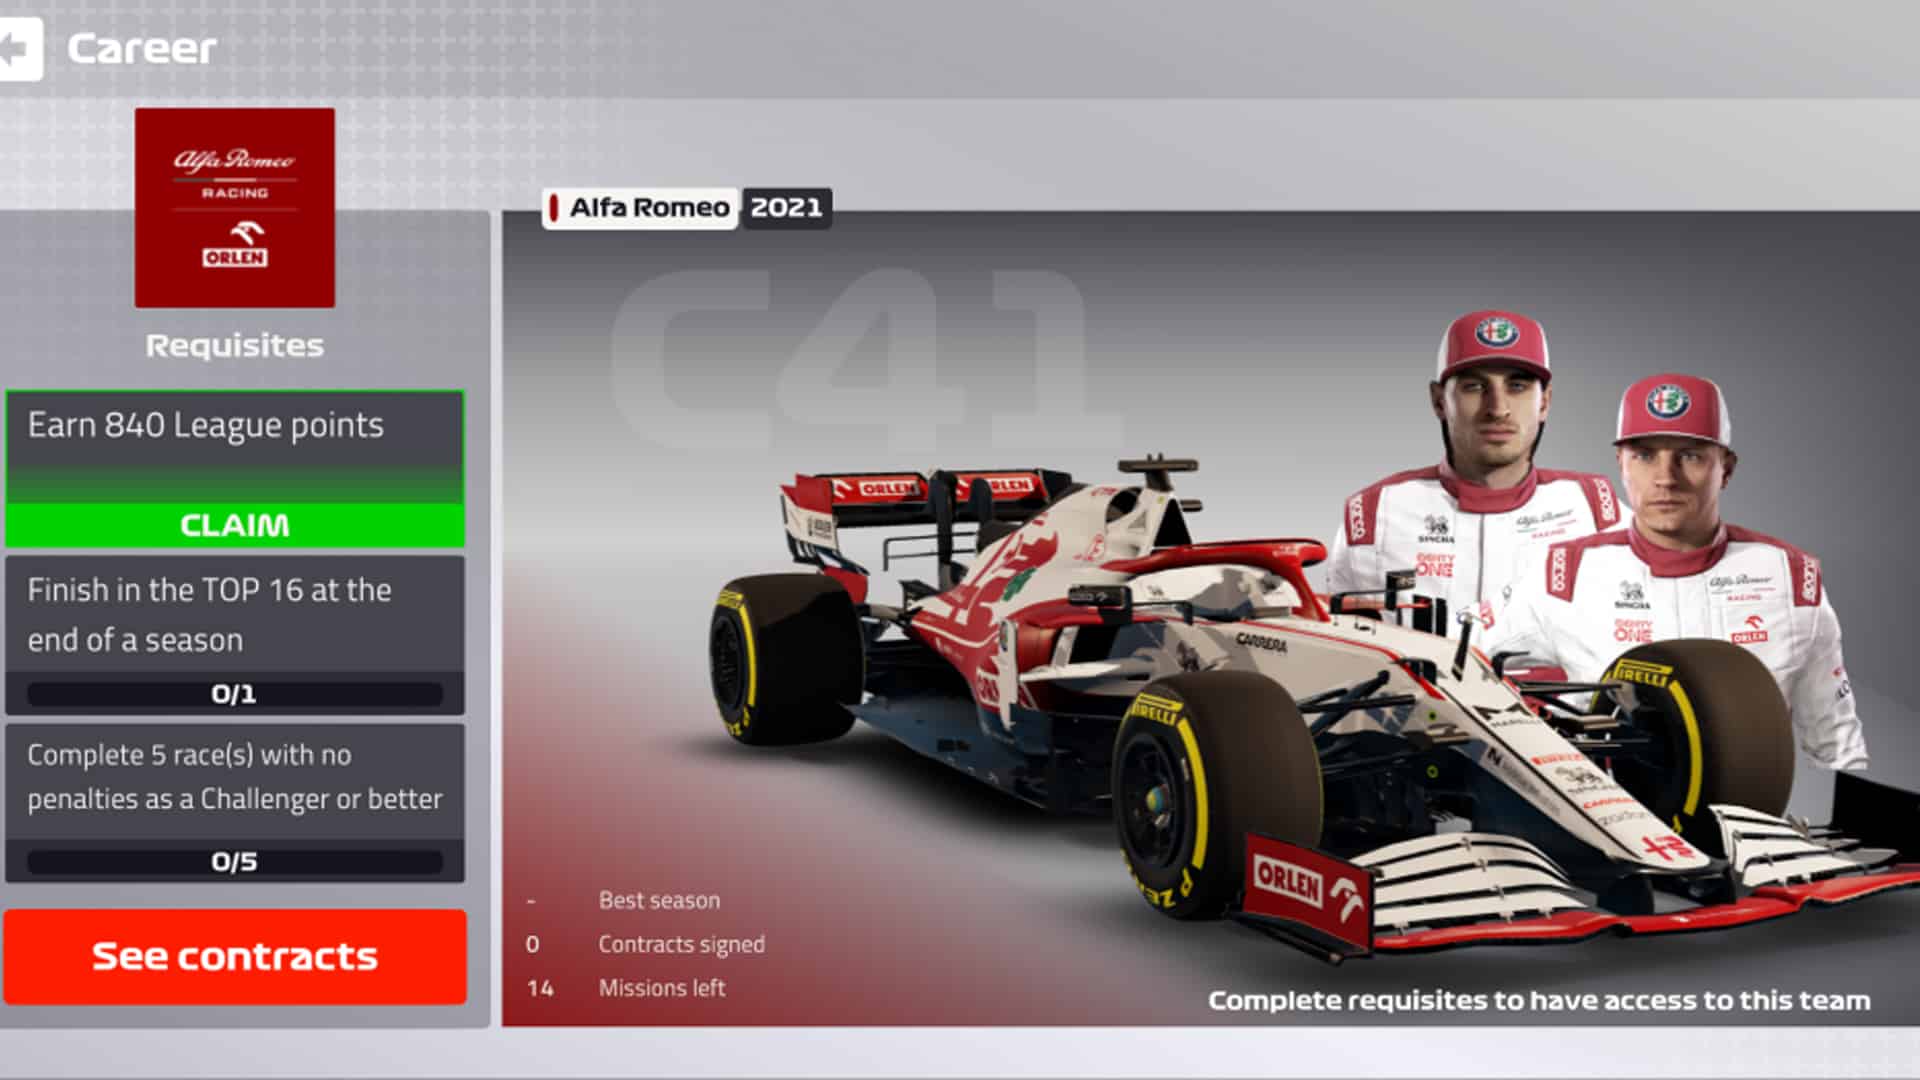 Career mode will be coming to F1 Mobile Racing soon